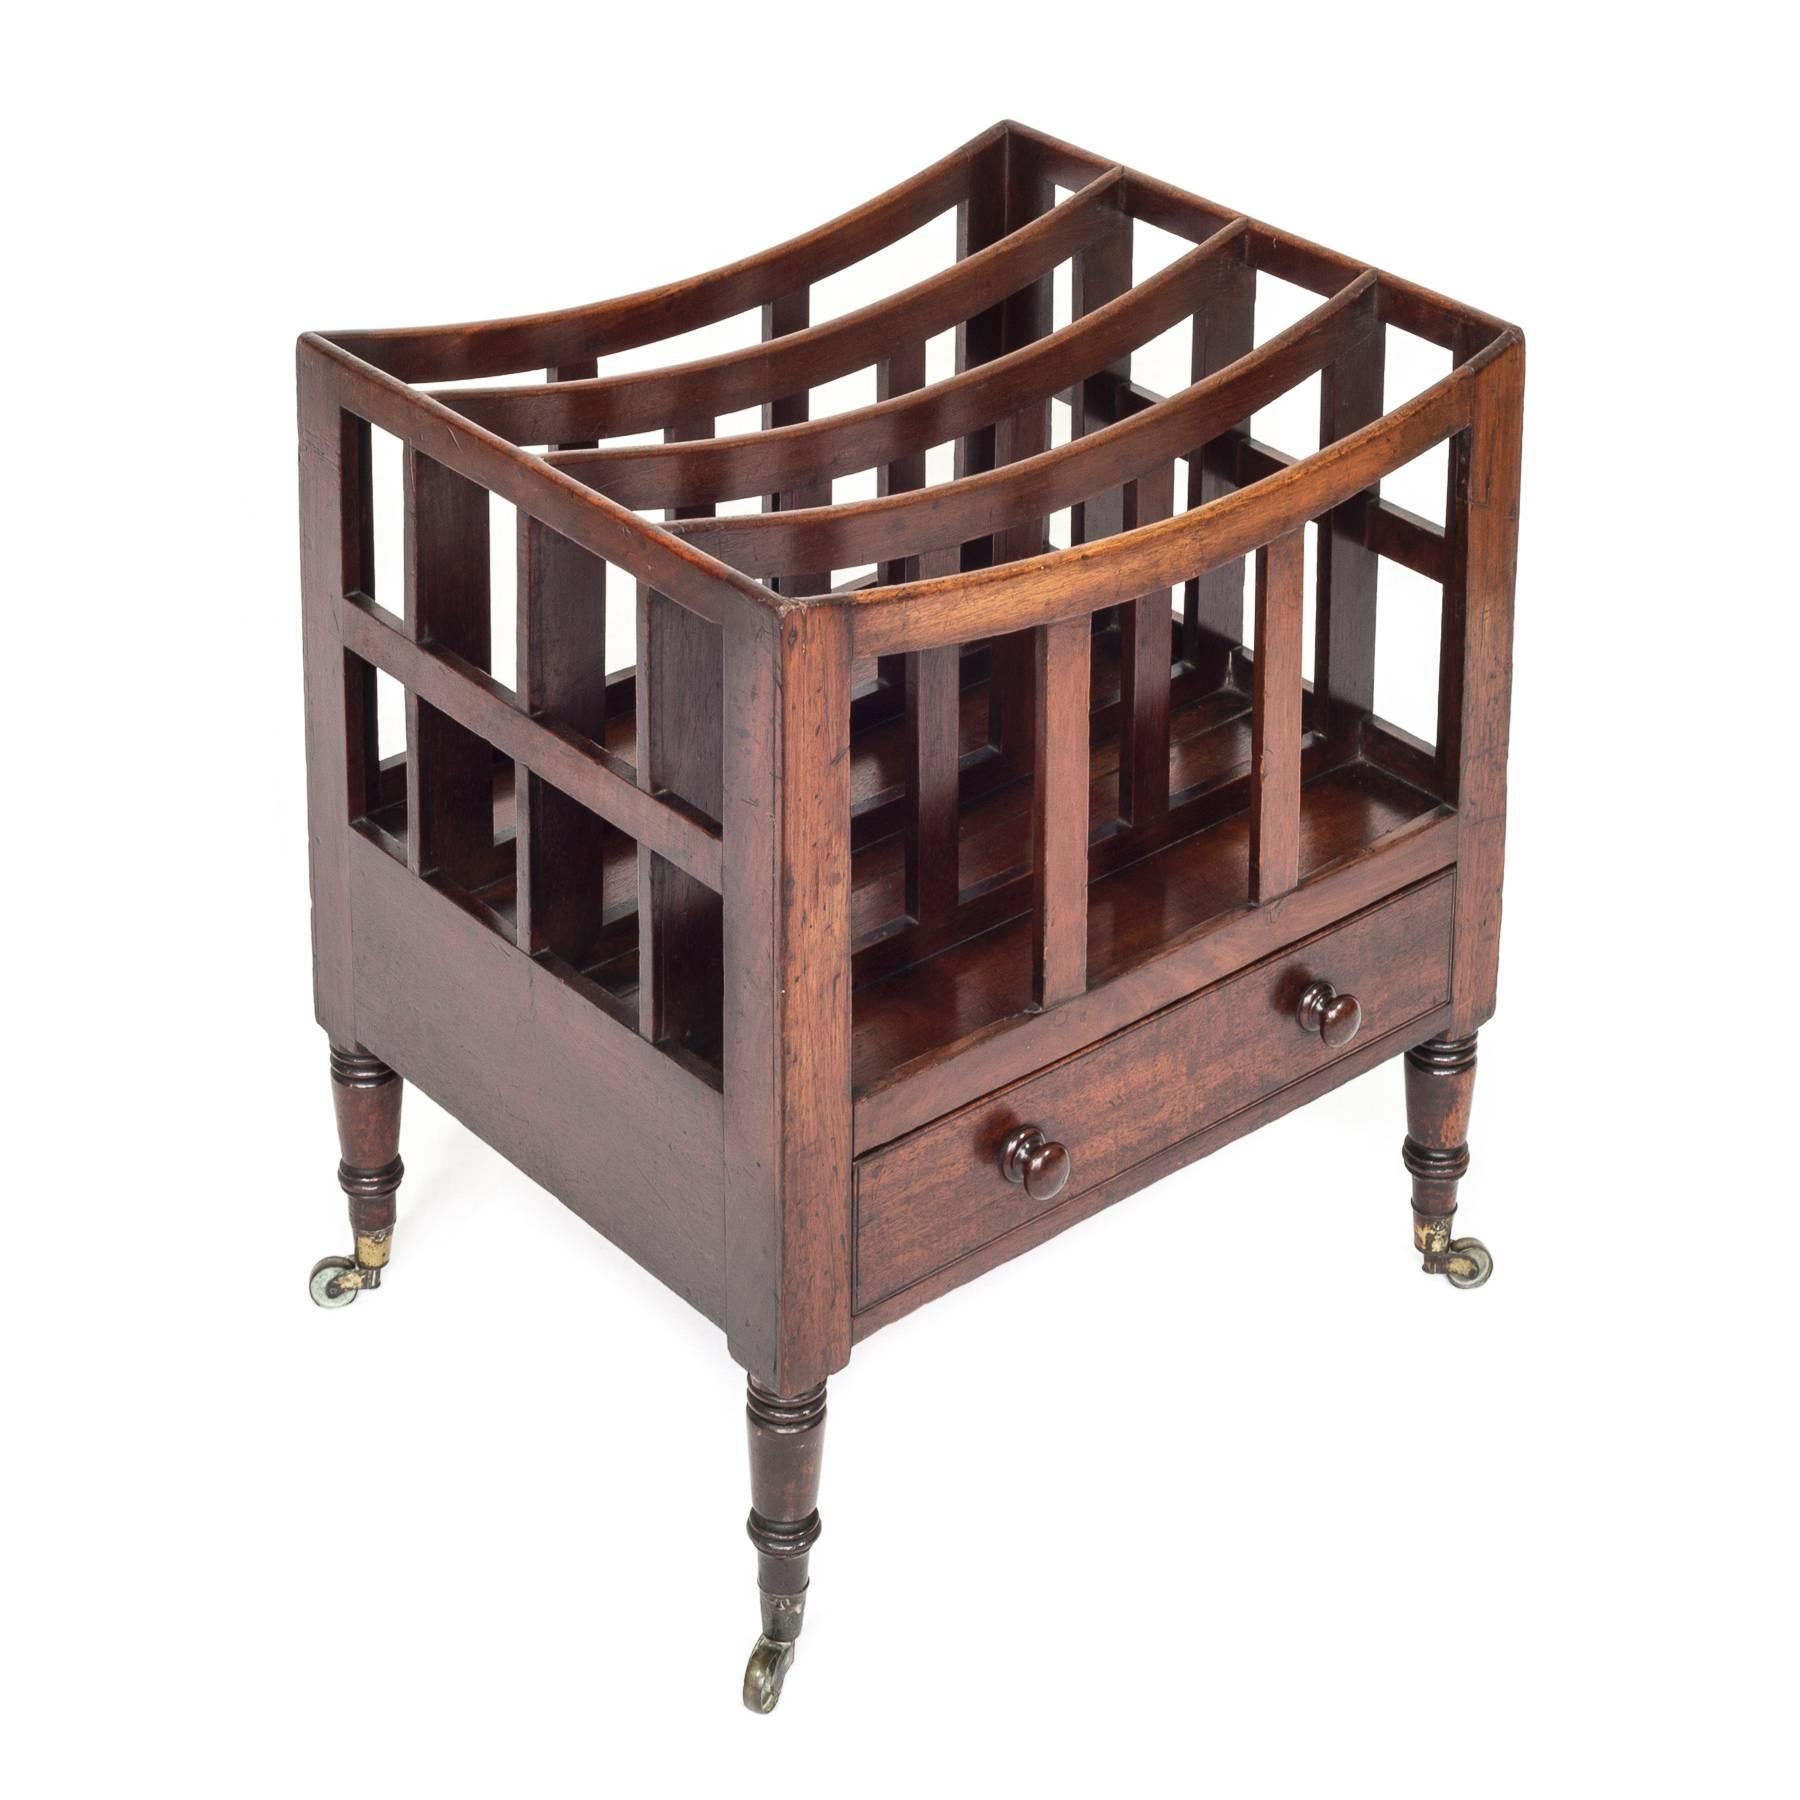 A fine and well proportioned late George III - early Regency mahogany Canterbury, with four curved divisions above a frieze drawer, supported on four ring-turned tapering legs, ending in original brass castors. The drawer is hand dovetailed and